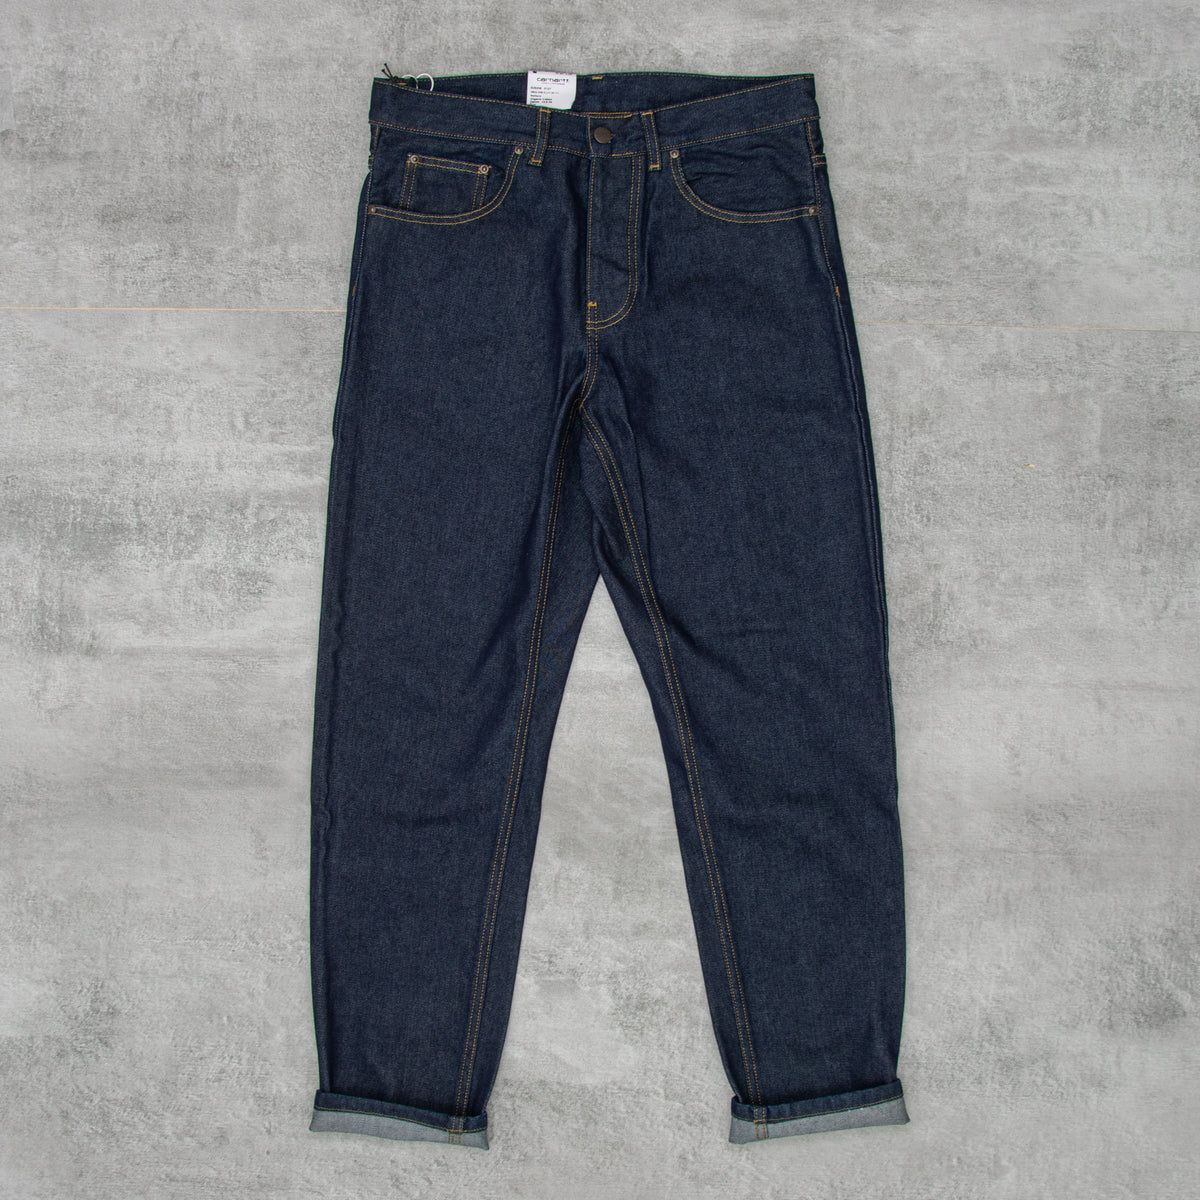 Buy the new Carhartt Newel Pant Jeans -Blue One Wash@Union Clothing ...